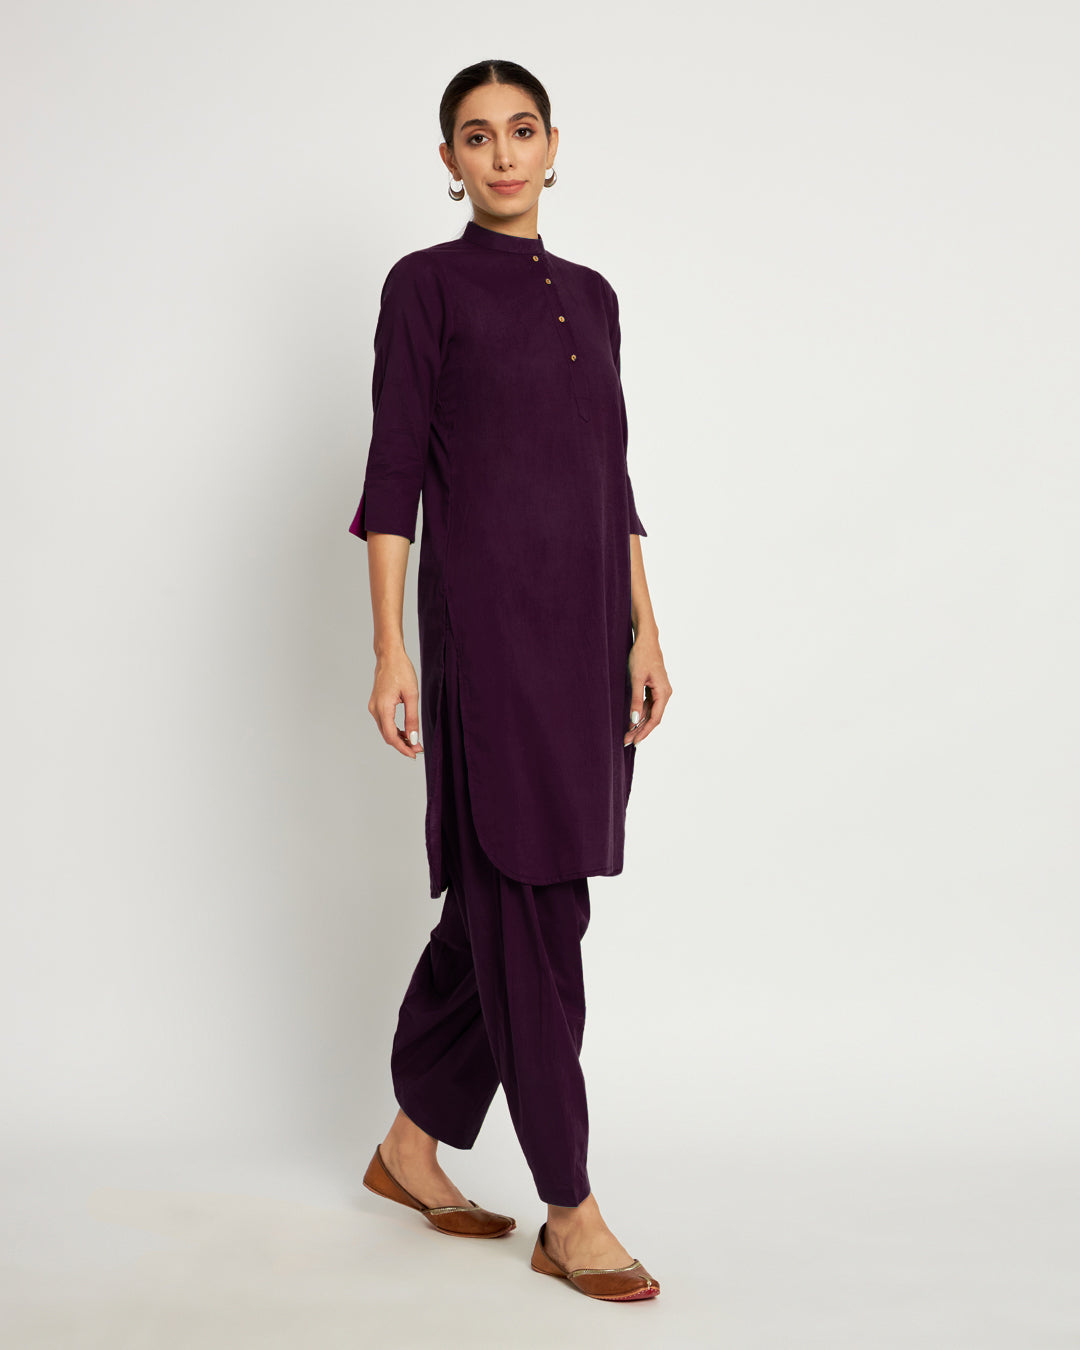 Plum Passion Band Collar Neck Solid Co-ord Set